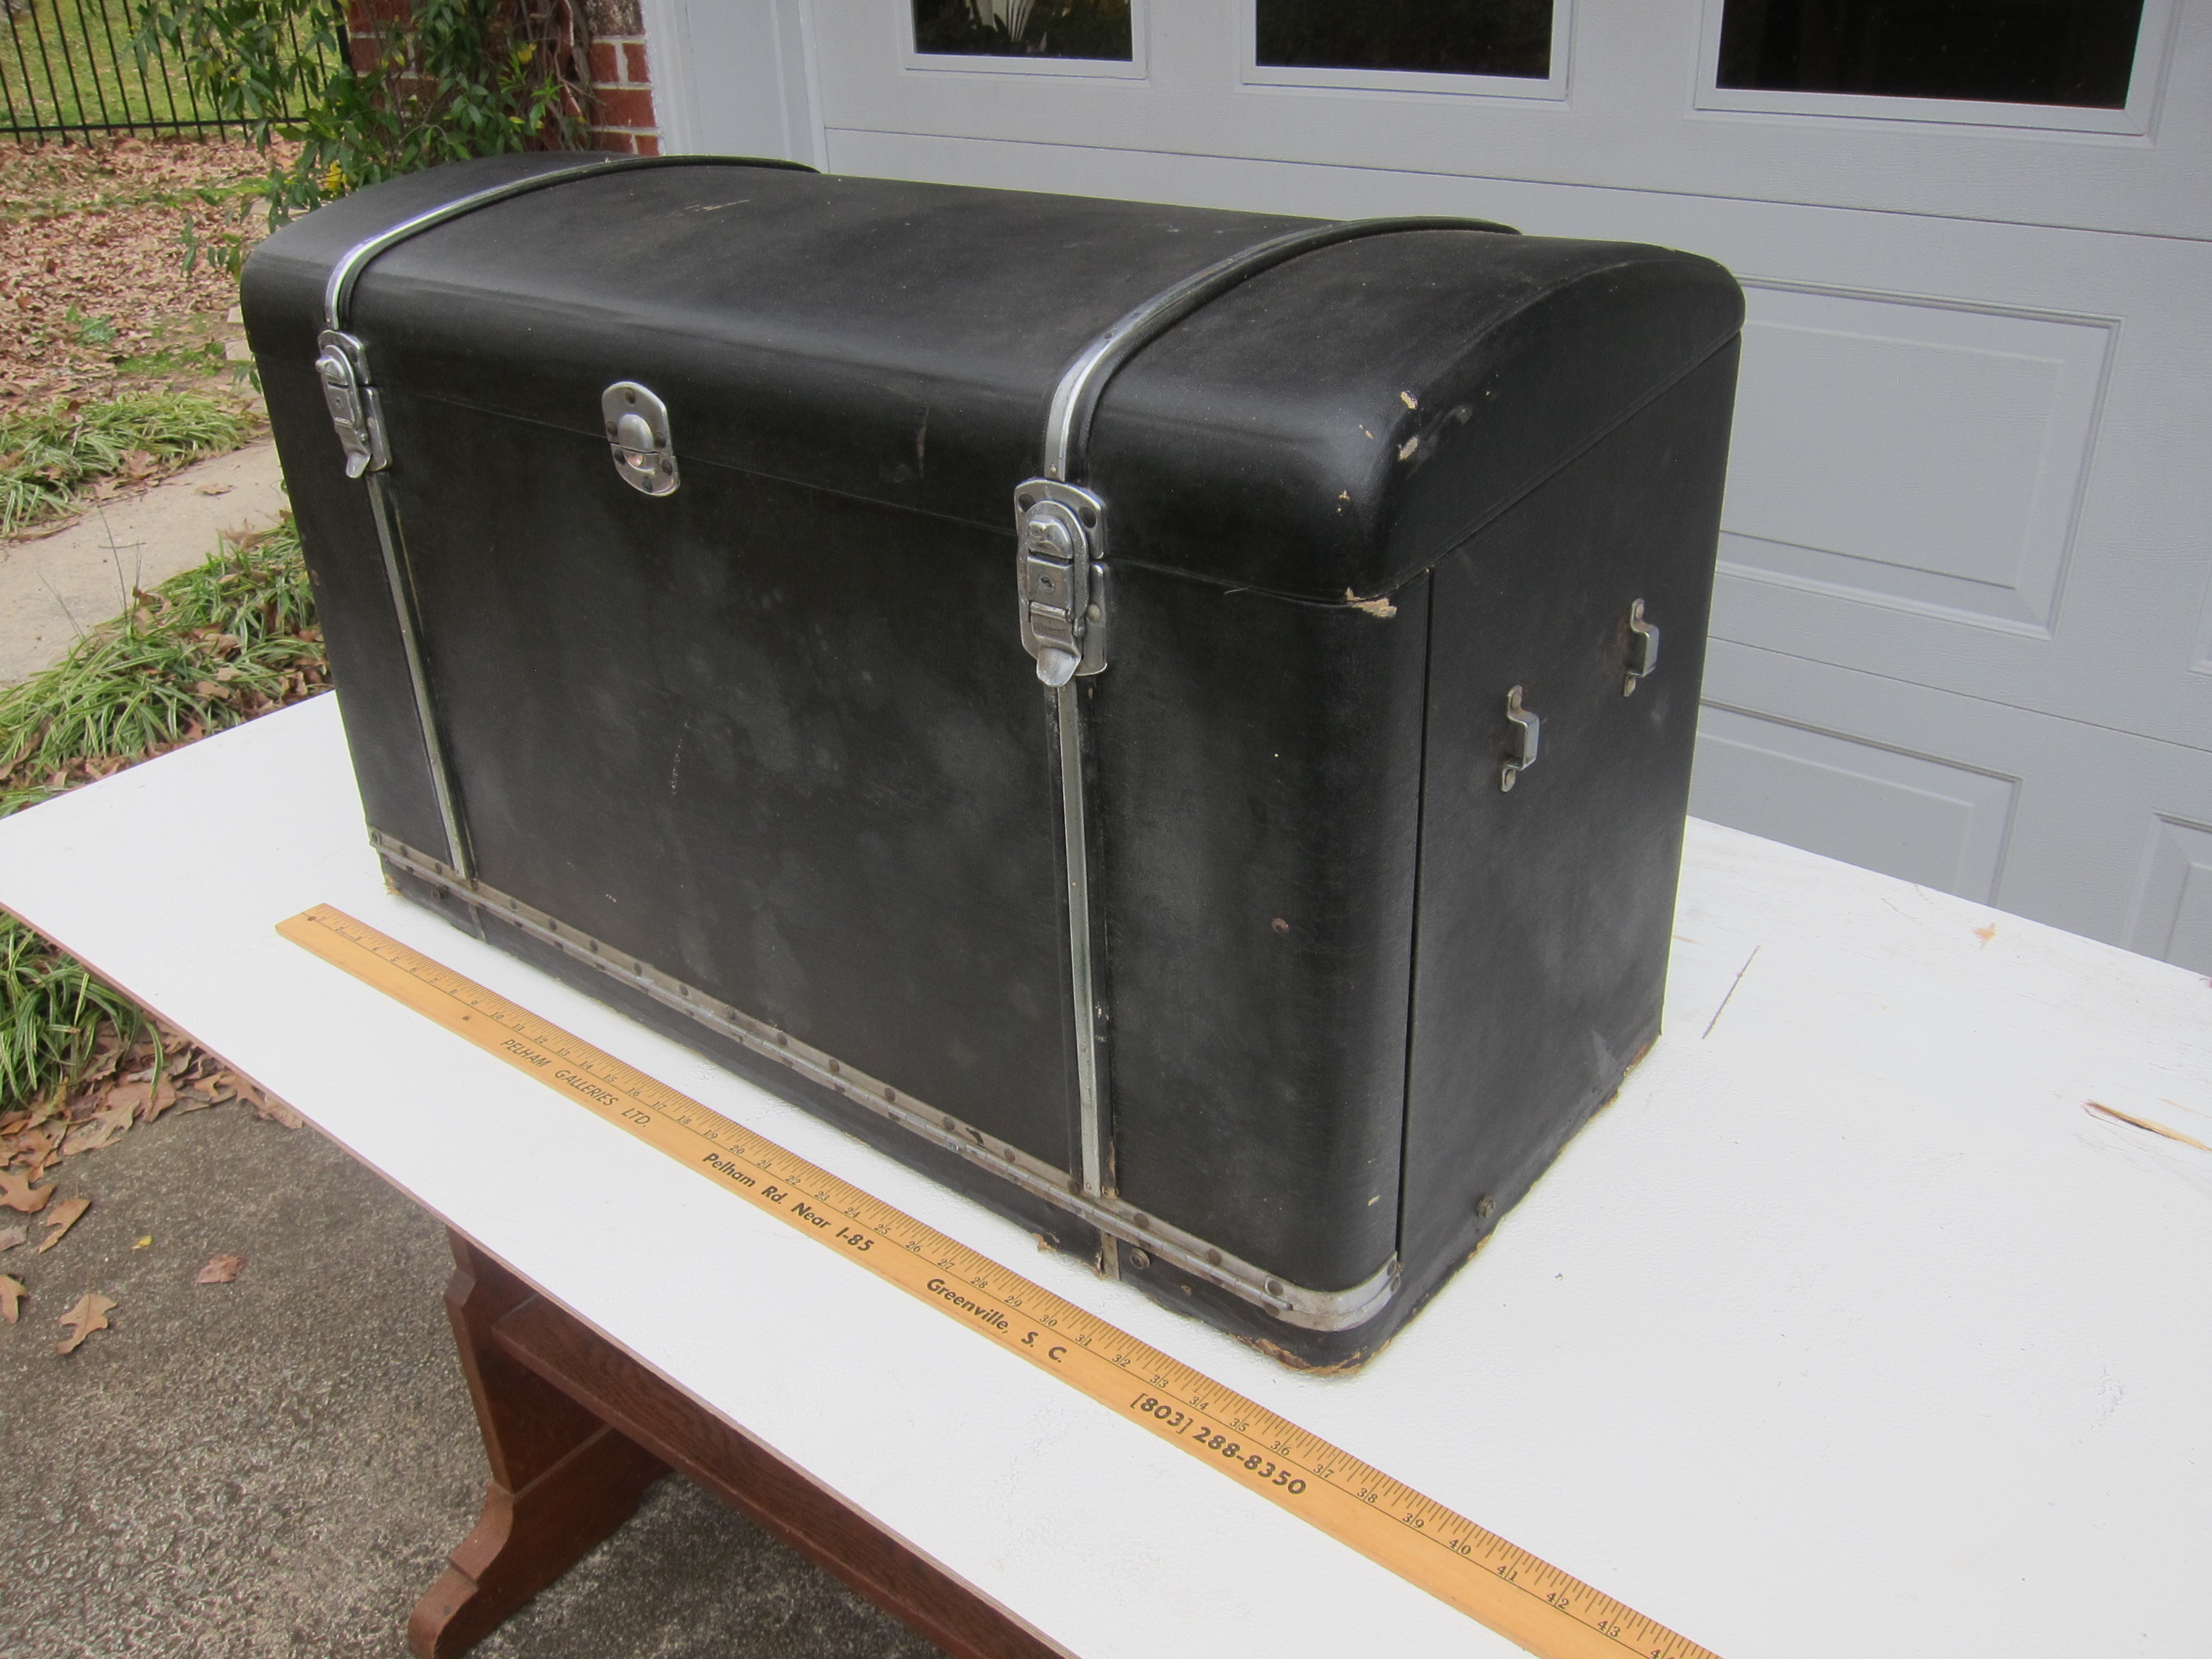 Good 1930s Leather Luggage Travel Trunk